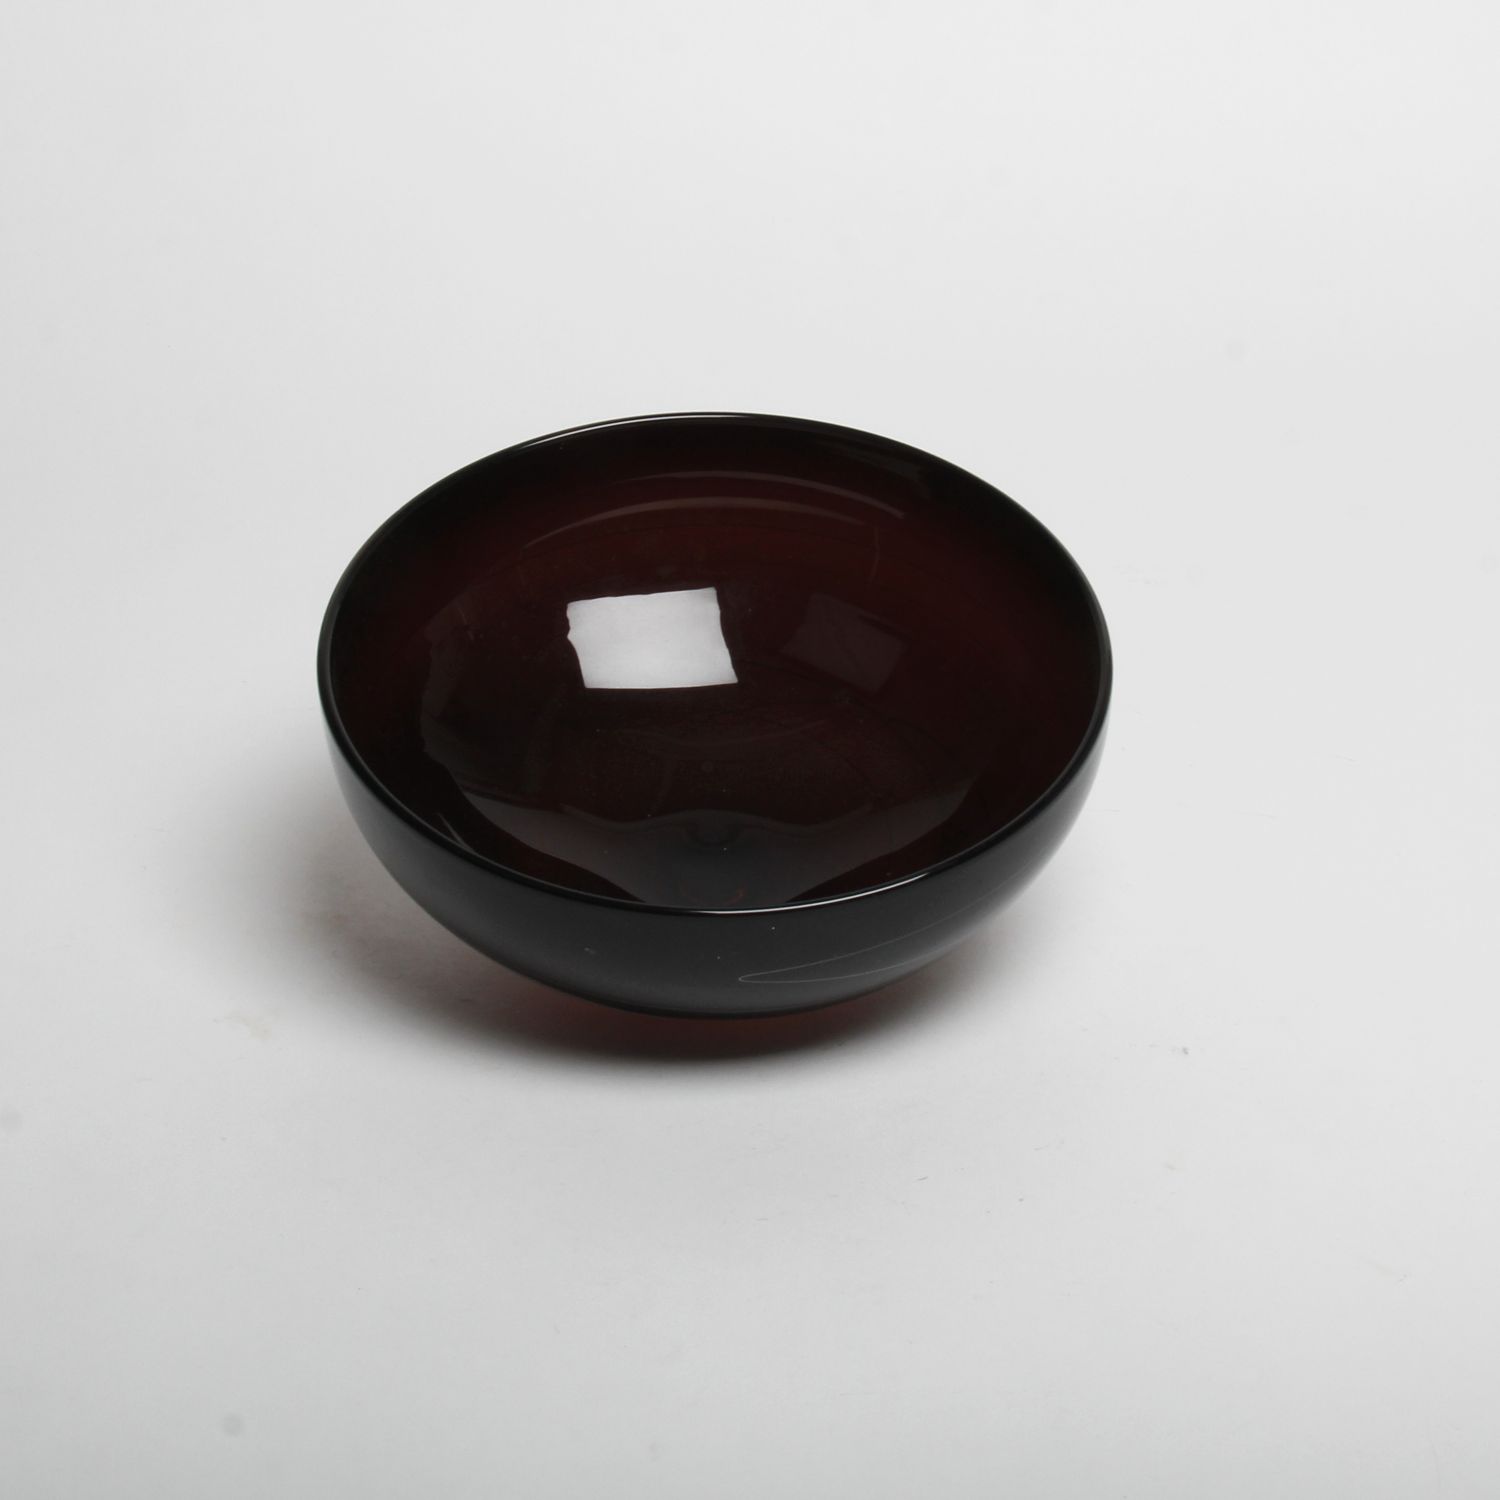 Eidos Glass Designs: Bowl (Each sold separately) Product Image 4 of 5